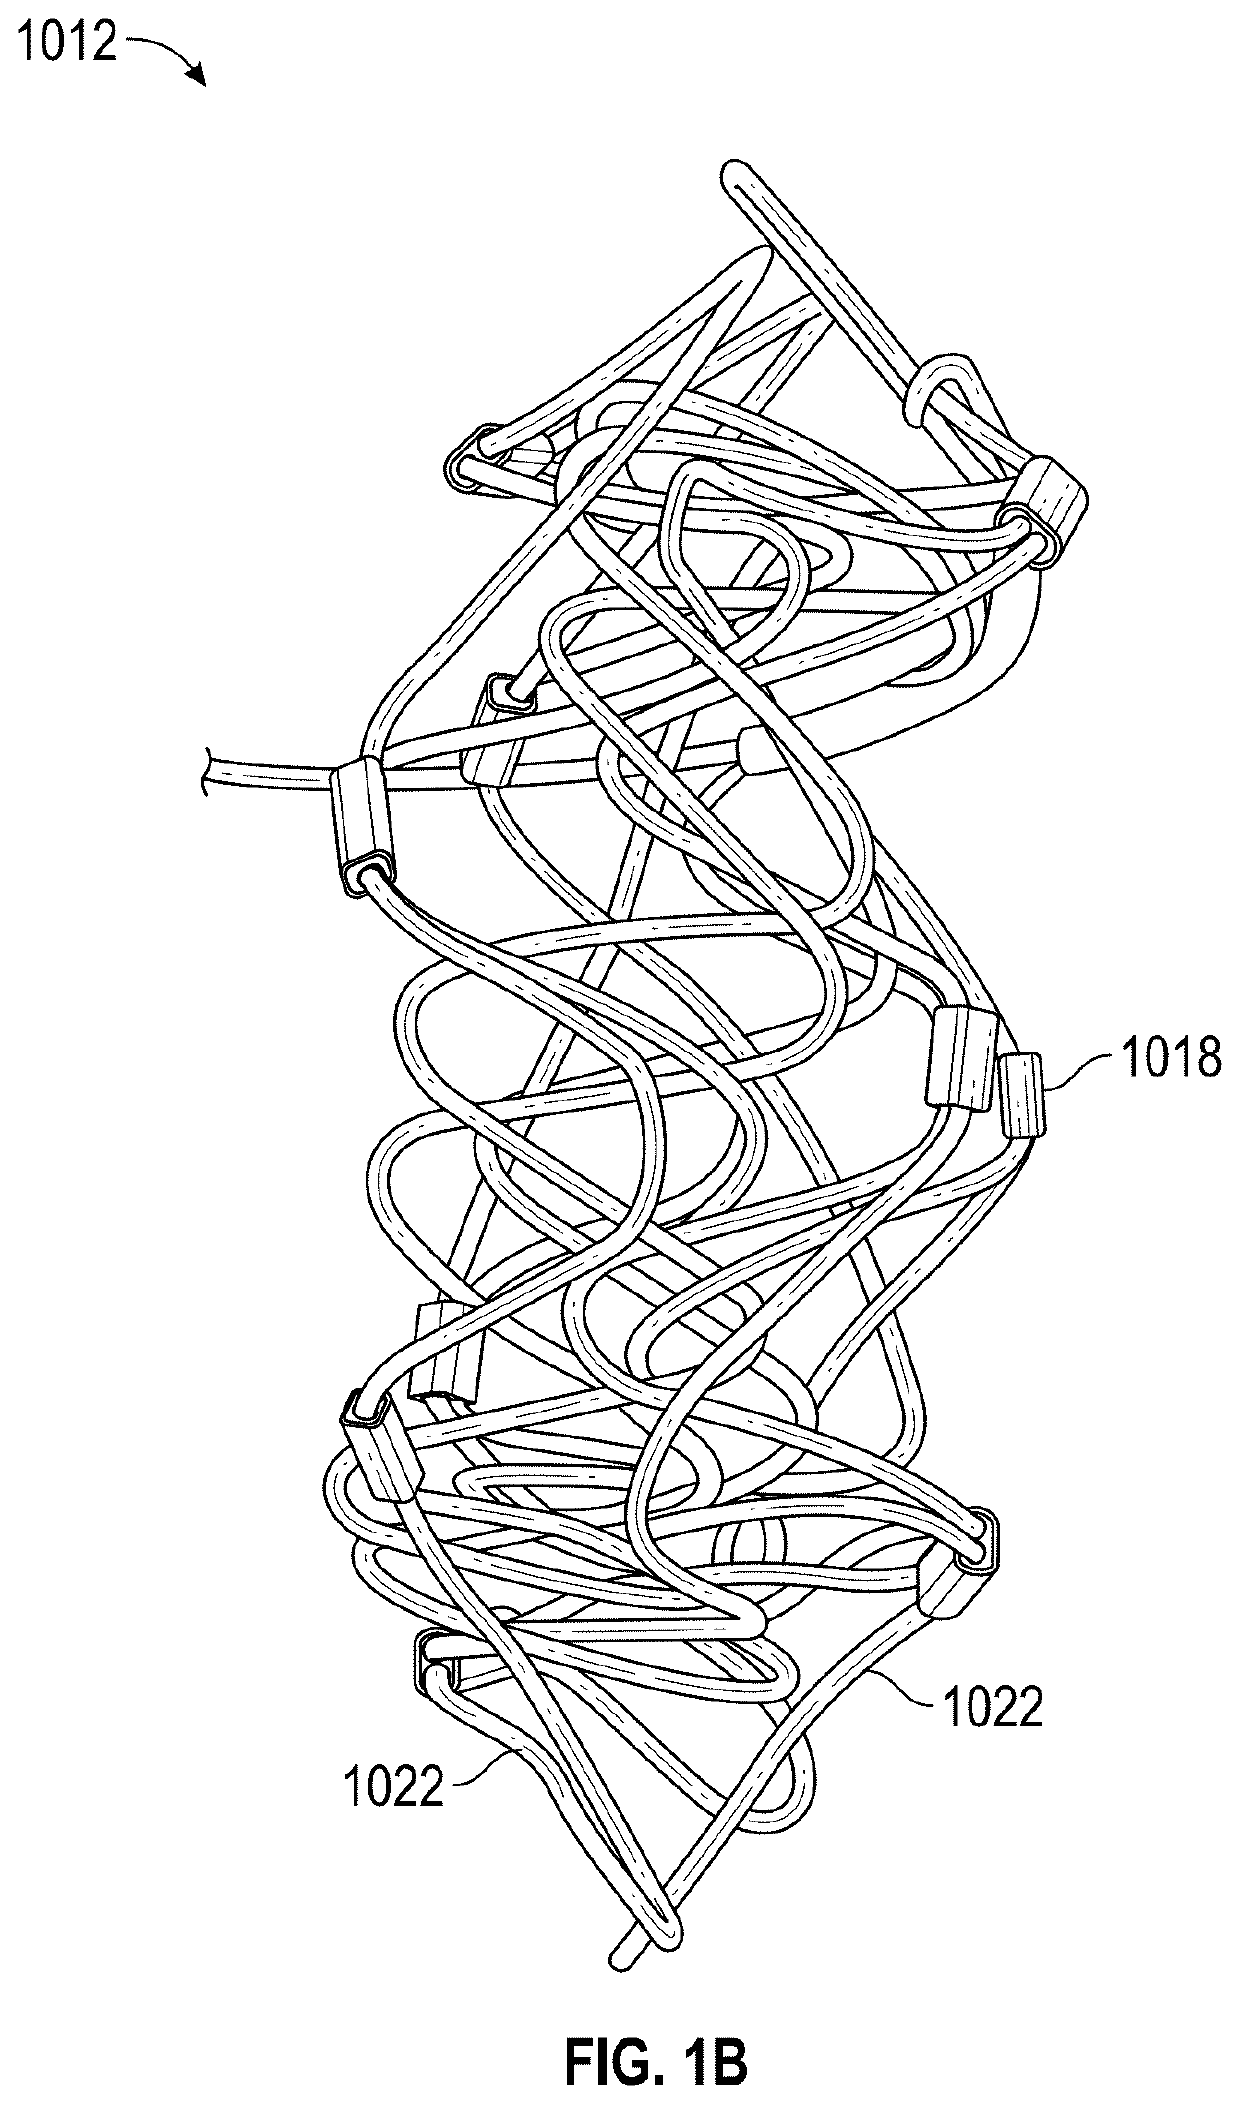 Percutaneous Potts Shunt Devices and Related Methods